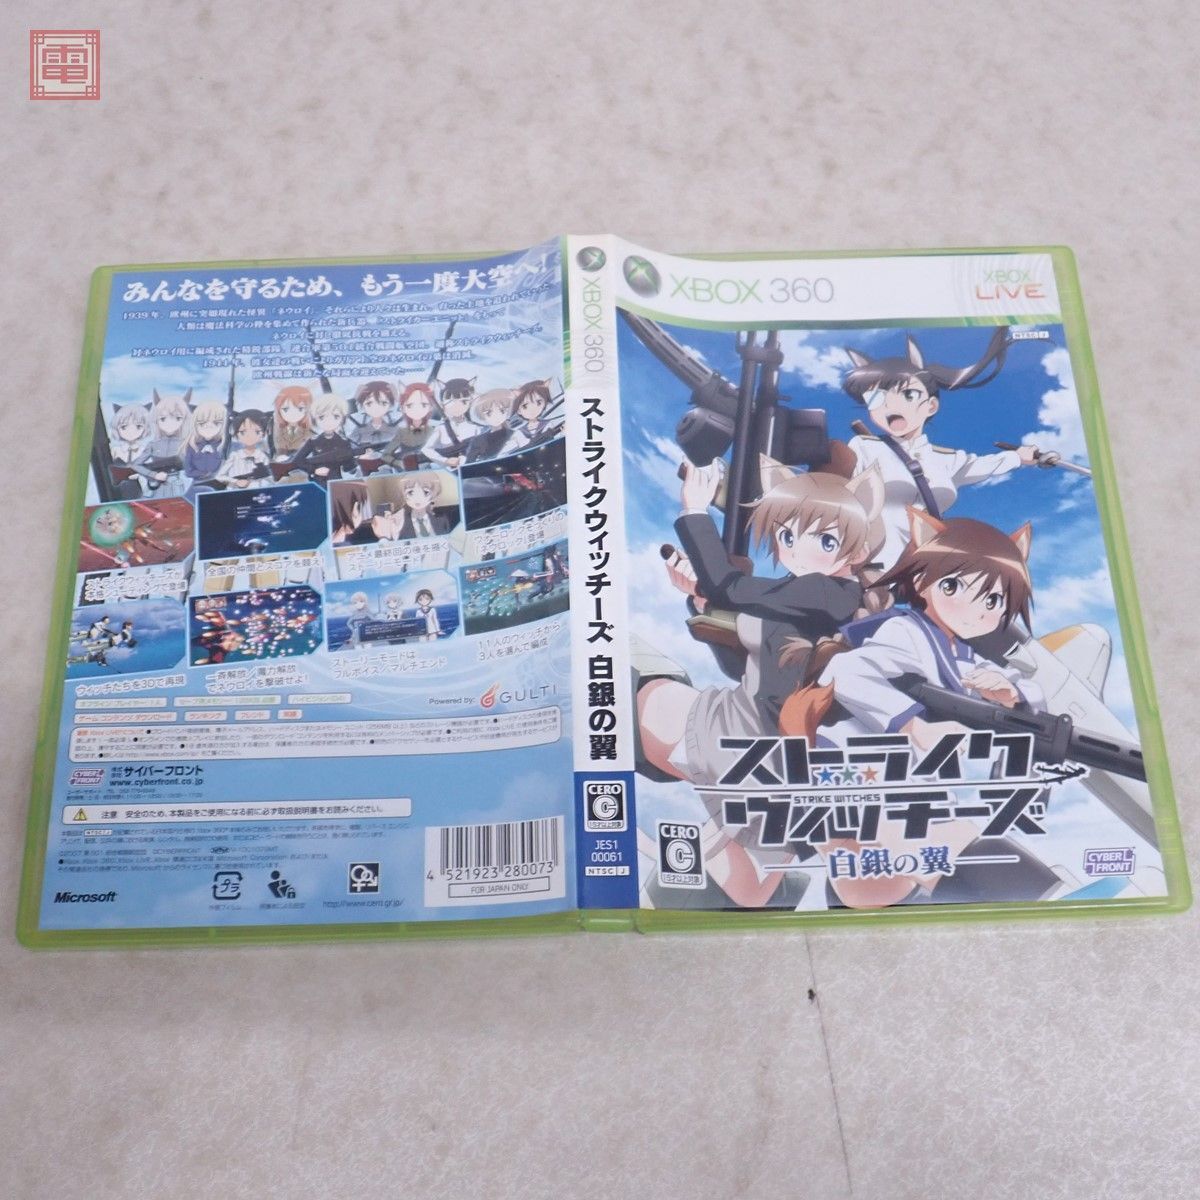  operation guarantee goods XBOX360 Strike Witches white silver. wing STRIKE WITCHES Cyber front CYBER FRONT GULTI box opinion attaching [10